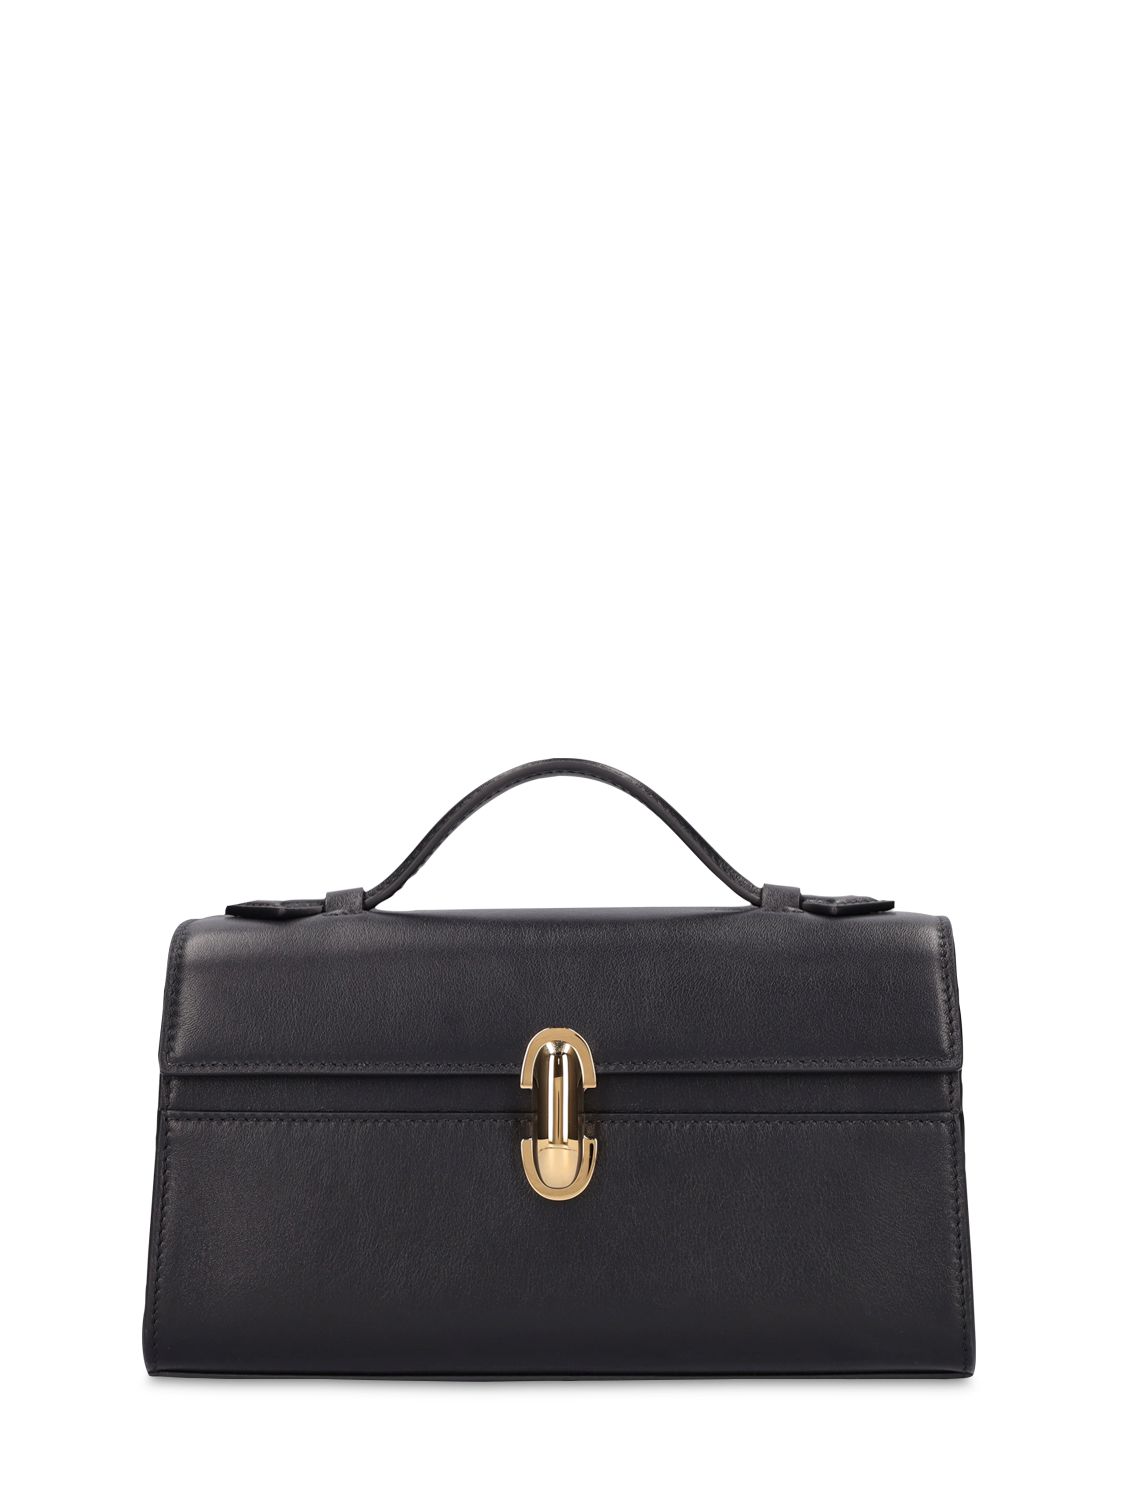 The Symmetry Leather Top Handle Bag